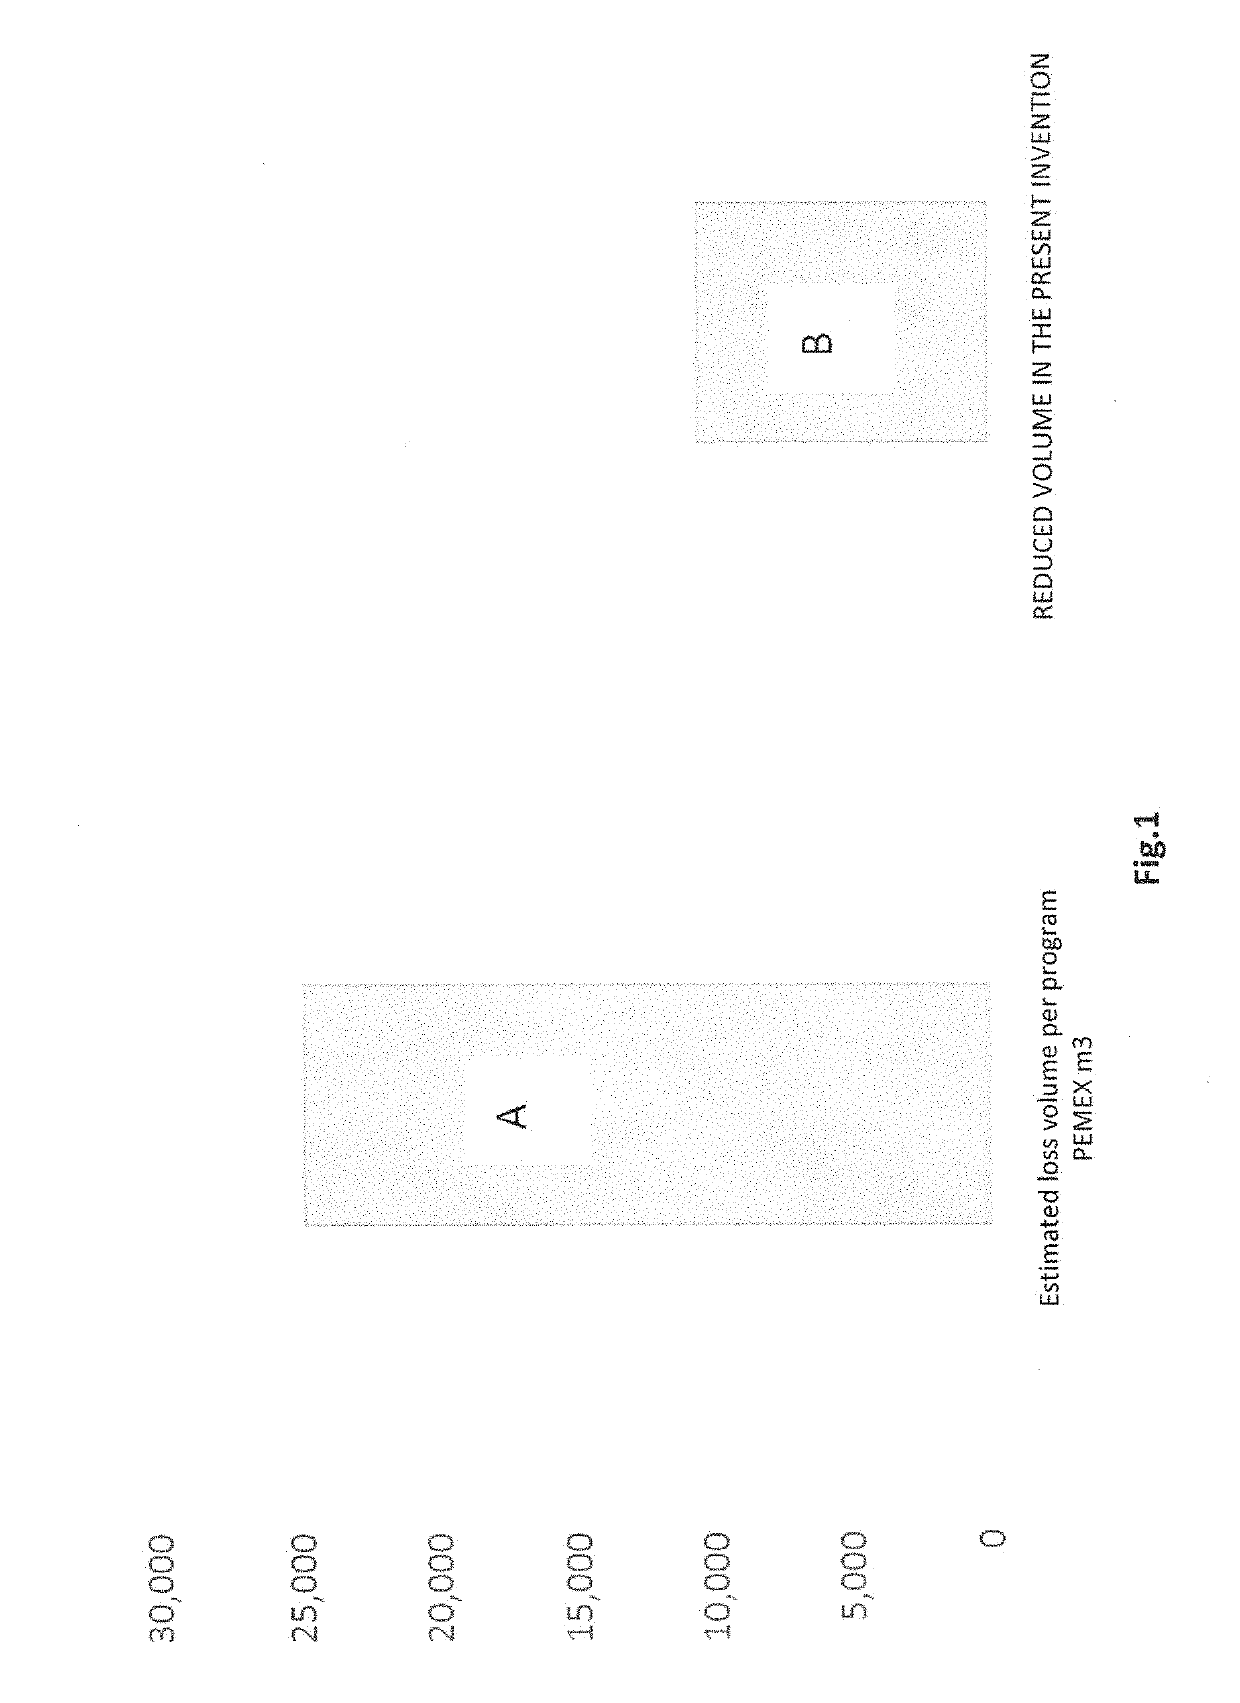 Method for forming a high-performance aqueous-phase polymer fluid and system for drilling well bores in low-gradient formations